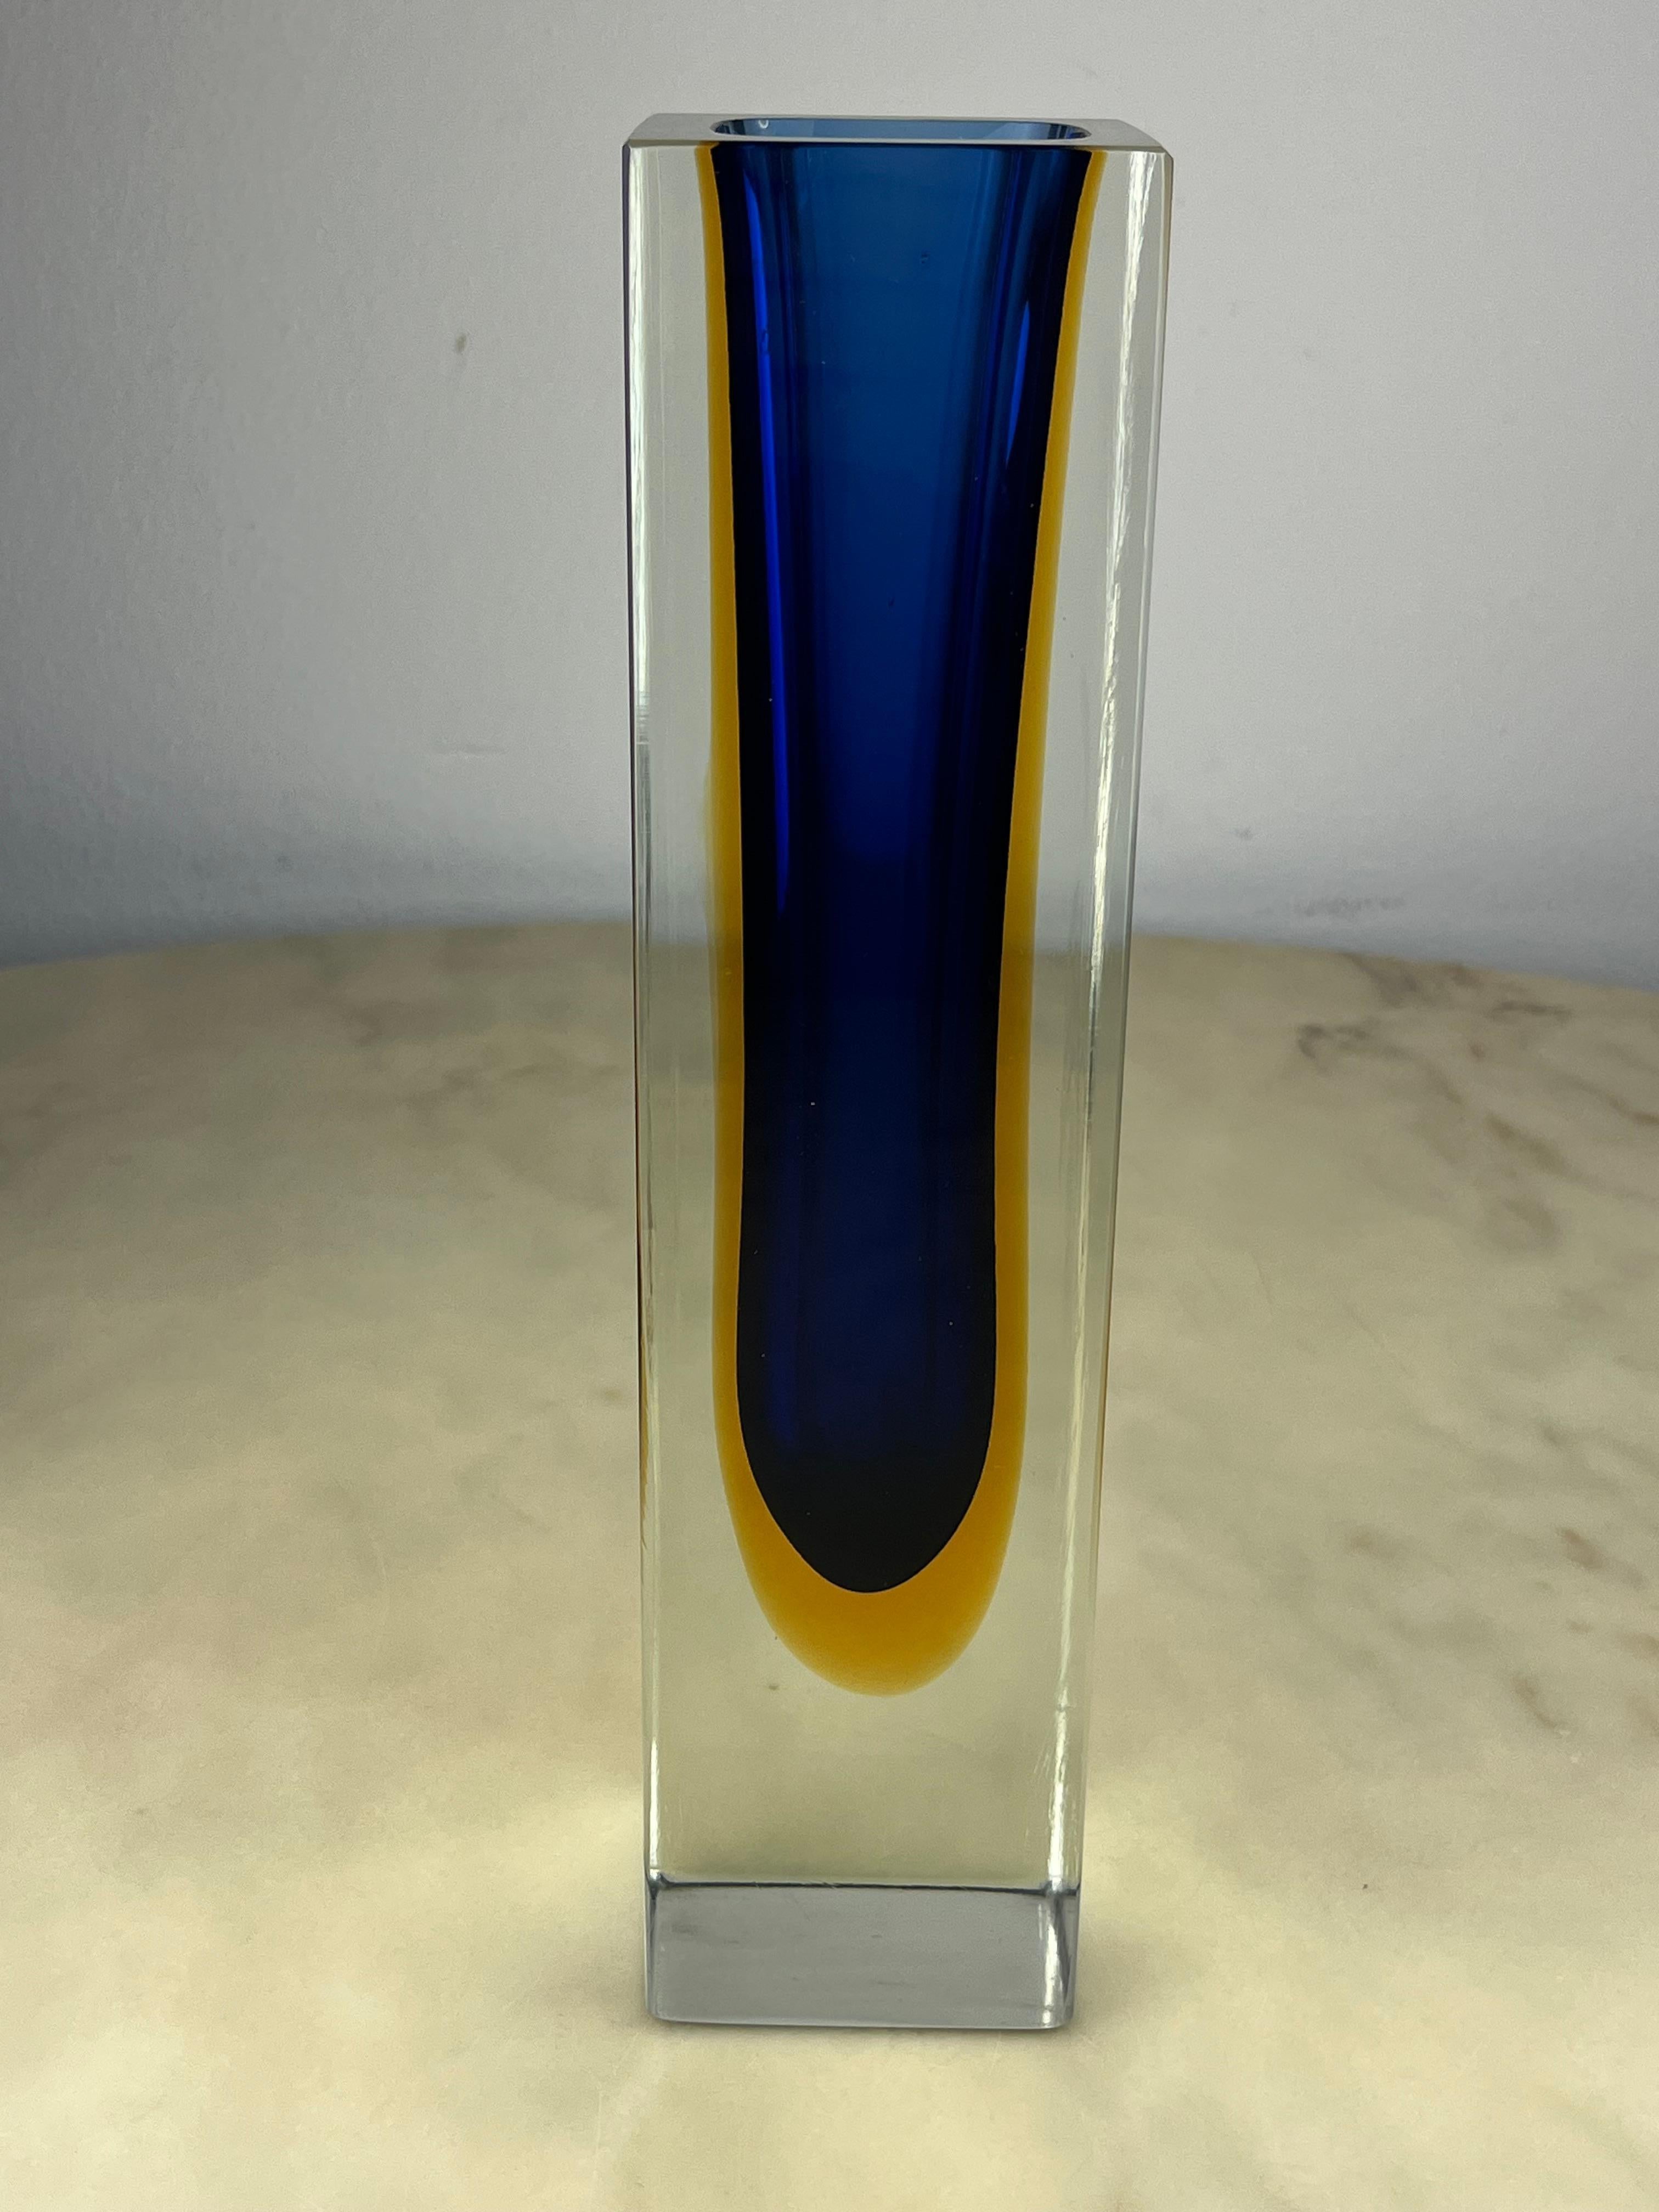 Murano submerged glass vase 30 cm high, attributed to Flavio Poli, Italy, 1970s
It has always belonged to my family and is in excellent condition. It has a very small chip, almost invisible.
It was purchased by my grandparents in Venice in one of